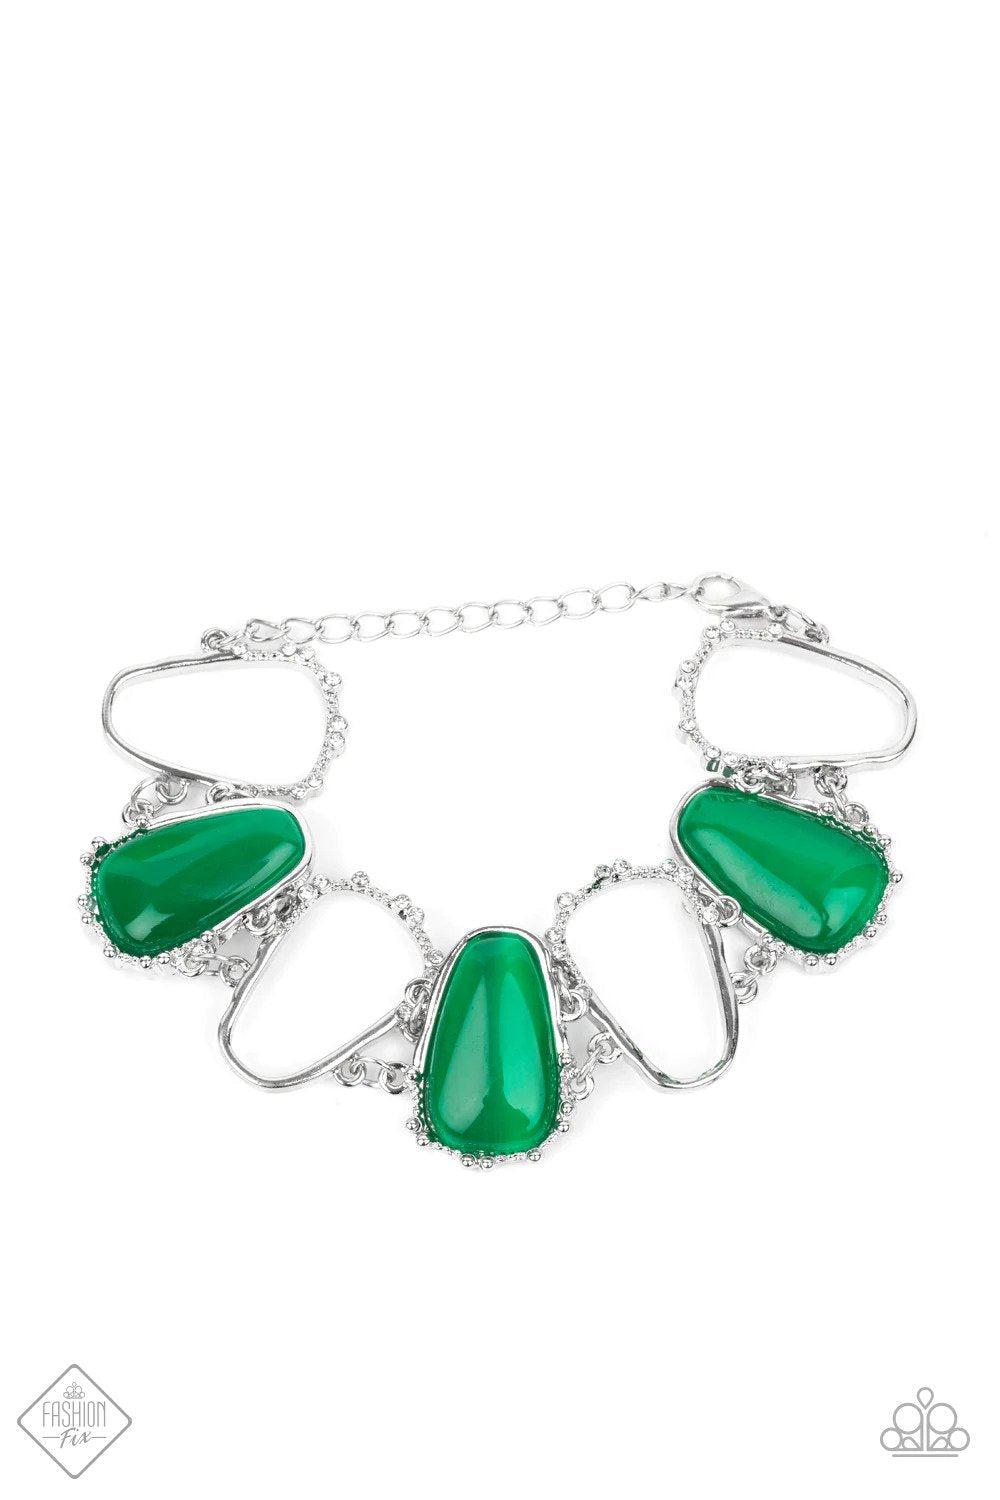 Yacht Club Couture Green Bracelet - Paparazzi Accessories- lightbox - CarasShop.com - $5 Jewelry by Cara Jewels